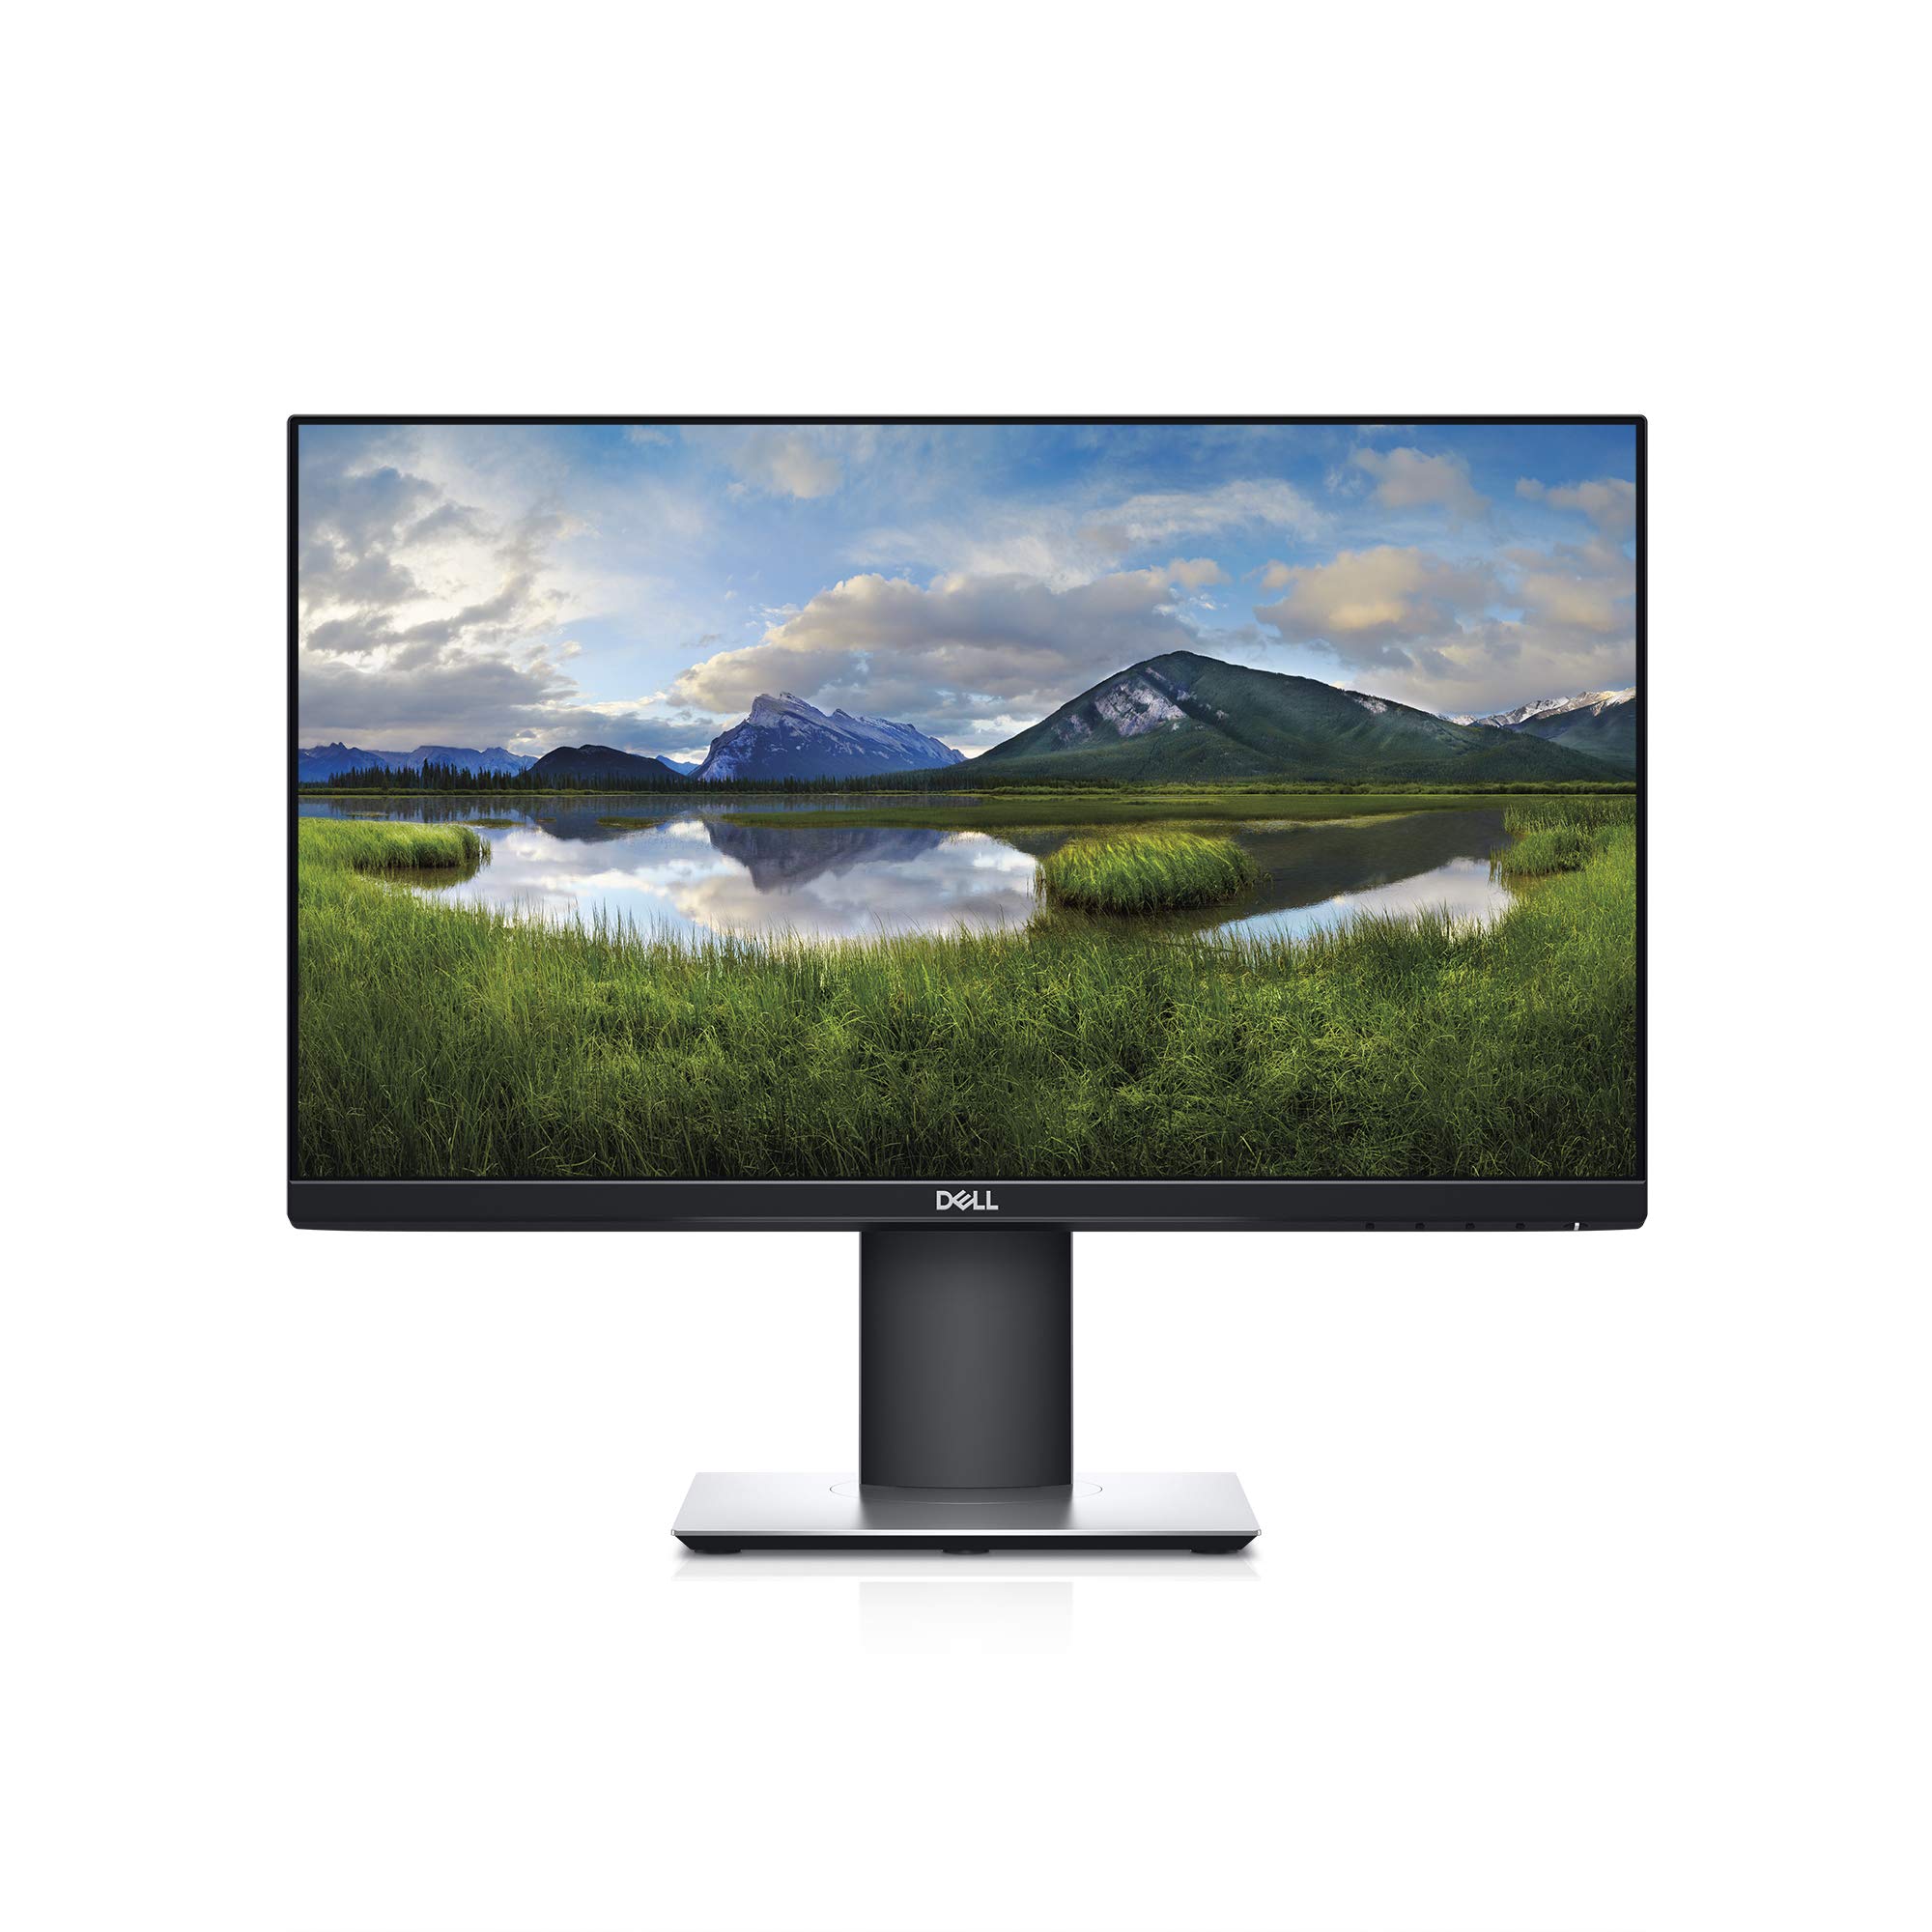 P2219H Widescreen LCD Monitor